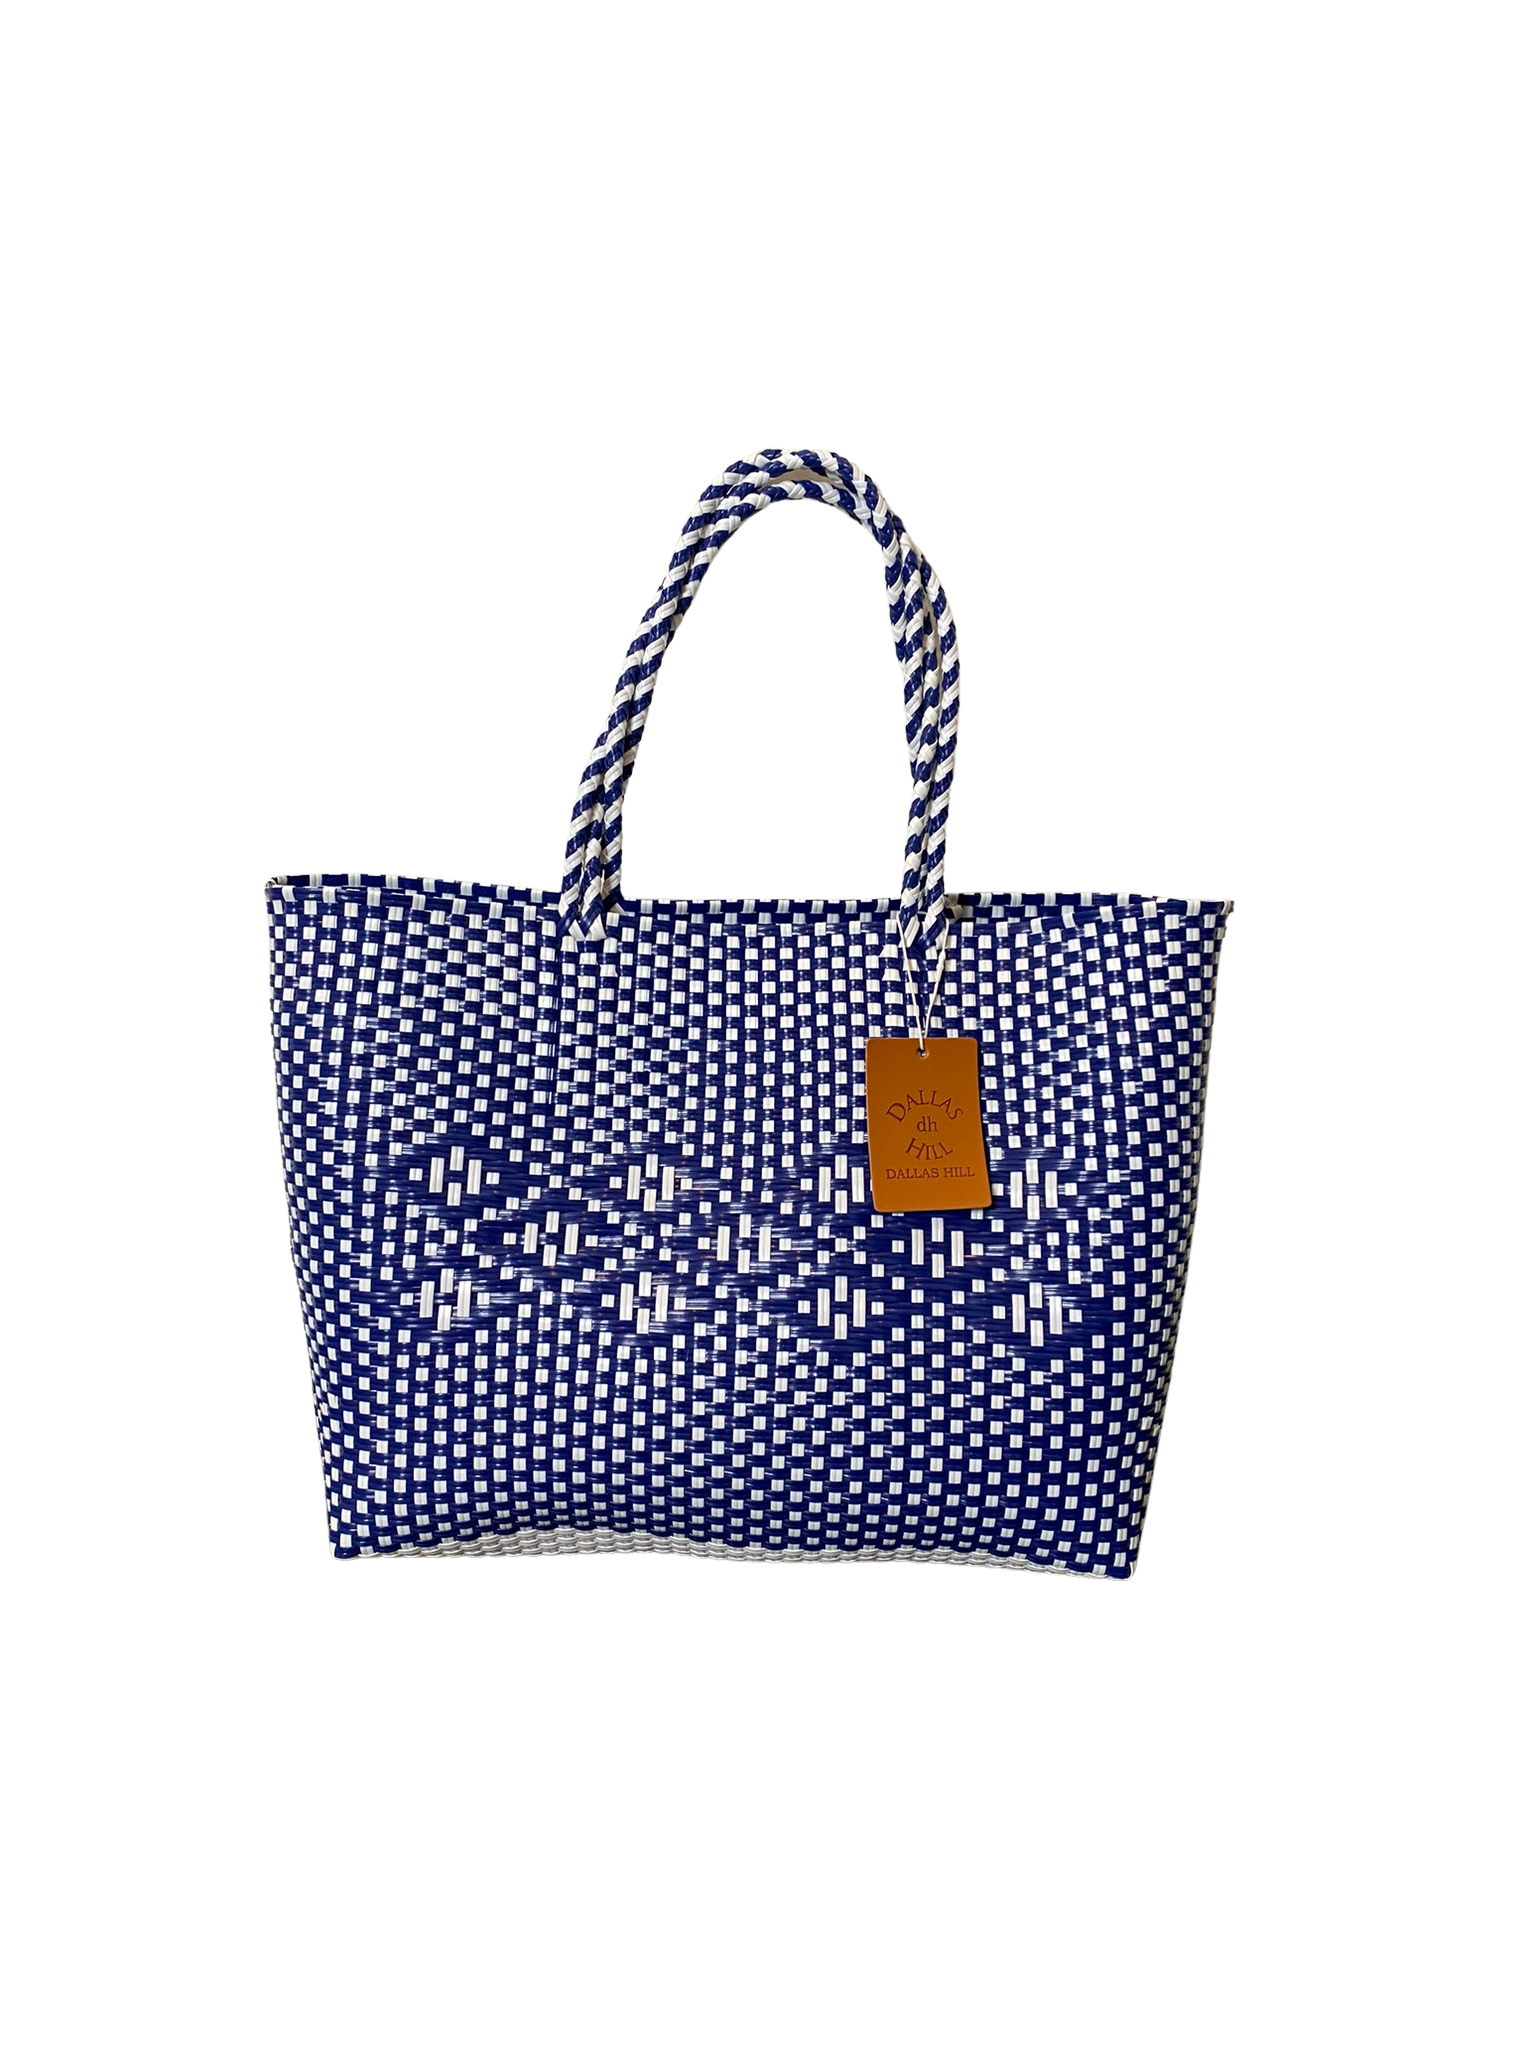 Hand-Woven Bag Made Of Recycled Plastic - Colores Del Mar - Marketspread